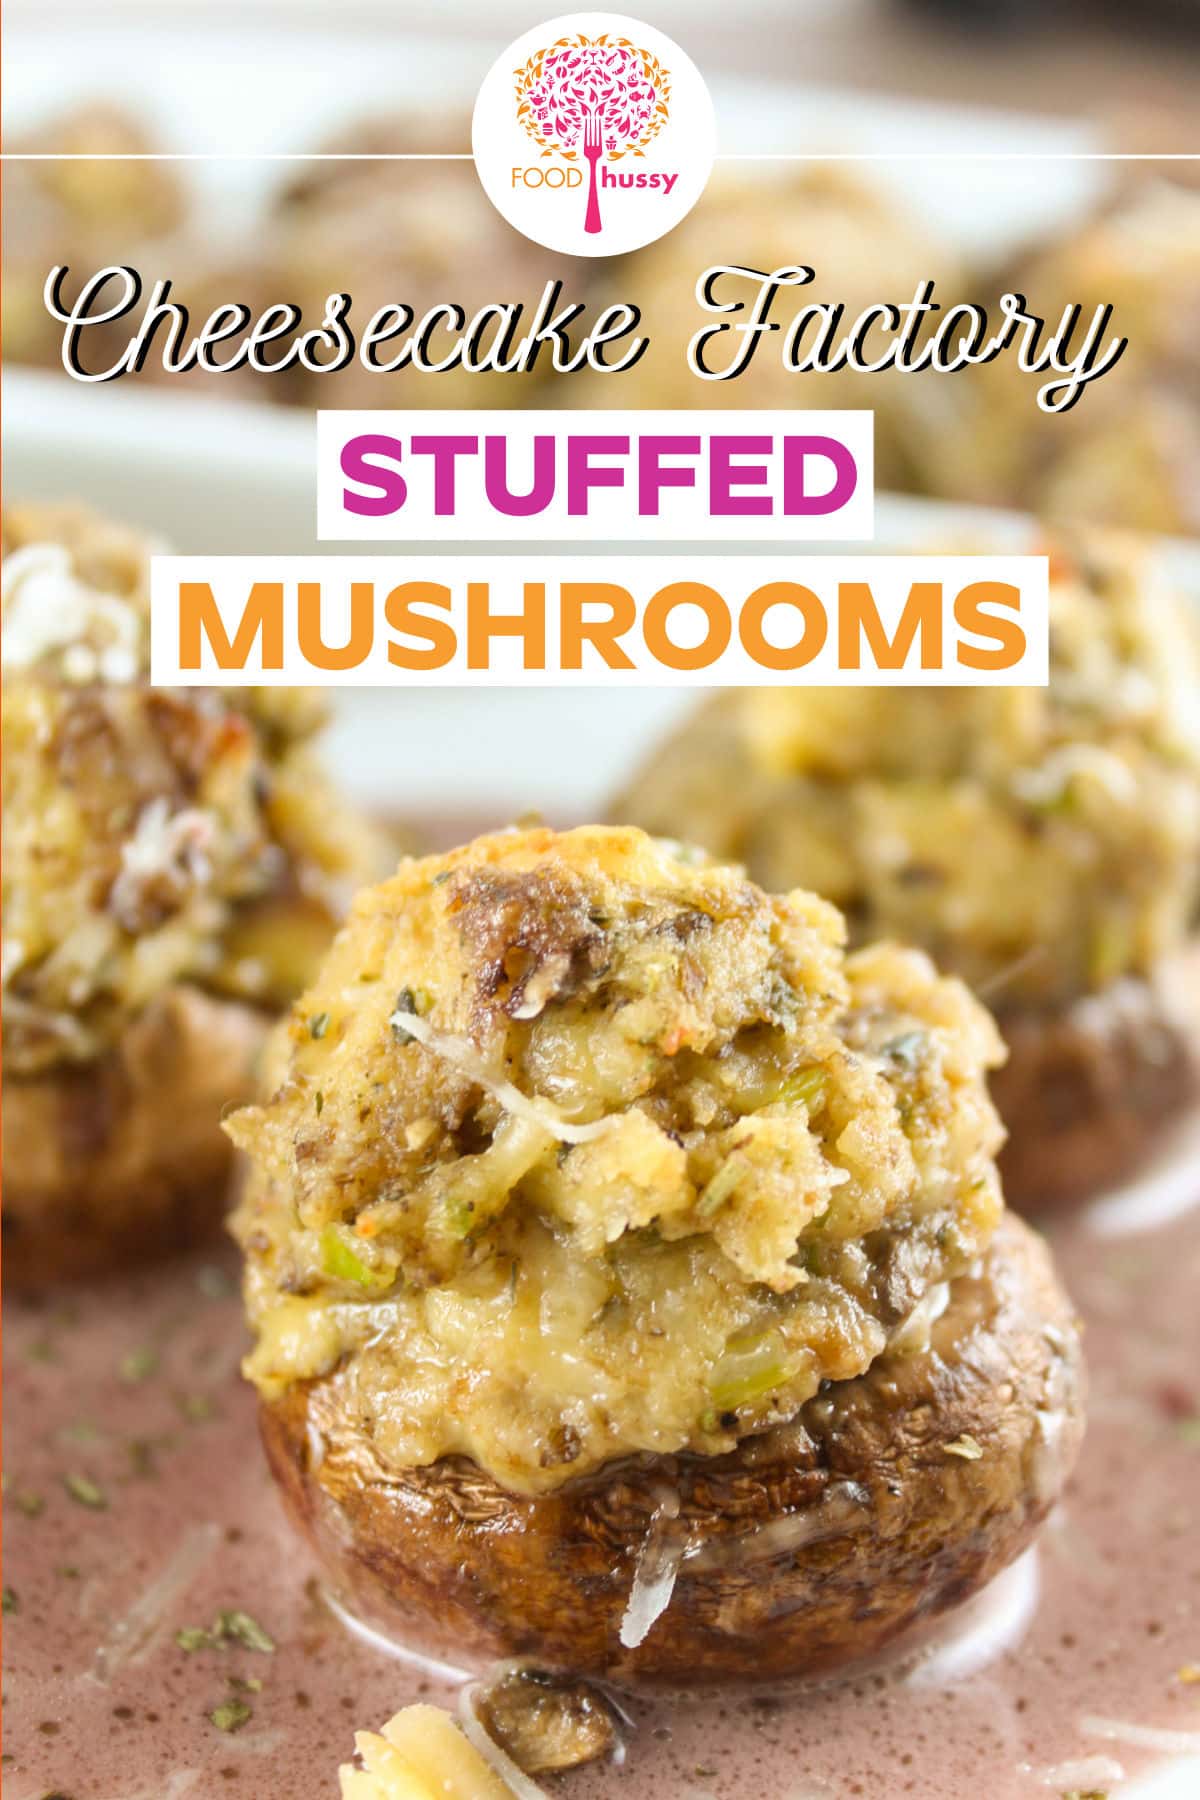 Cheesecake Factory Stuffed Mushrooms are the best appetizer on their menu! This authentic copycat recipe is stuffed with Fontina & Parmesan cheeses, more mushrooms and - of course - garlic. Then, the mushrooms are drizzled with a creamy red wine reduction. This recipe is spot on to the Cheesecake Factory! via @foodhussy